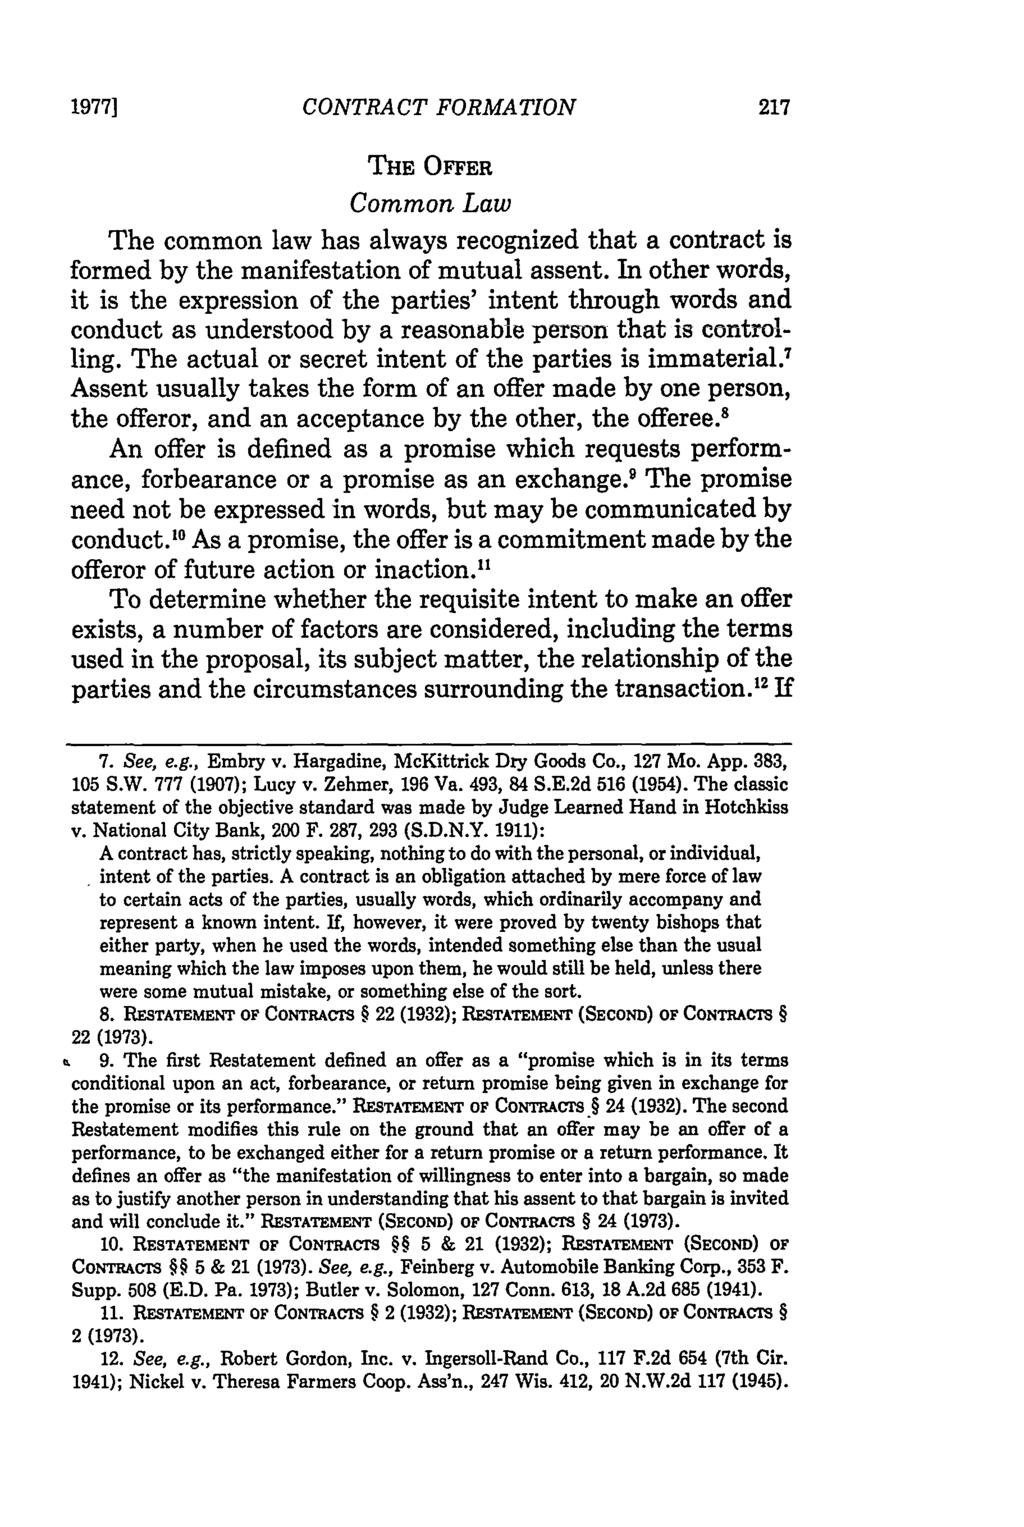 1977] CONTRACT FORMATION THE OFFER Common Law The common law has always recognized that a contract is formed by the manifestation of mutual assent.